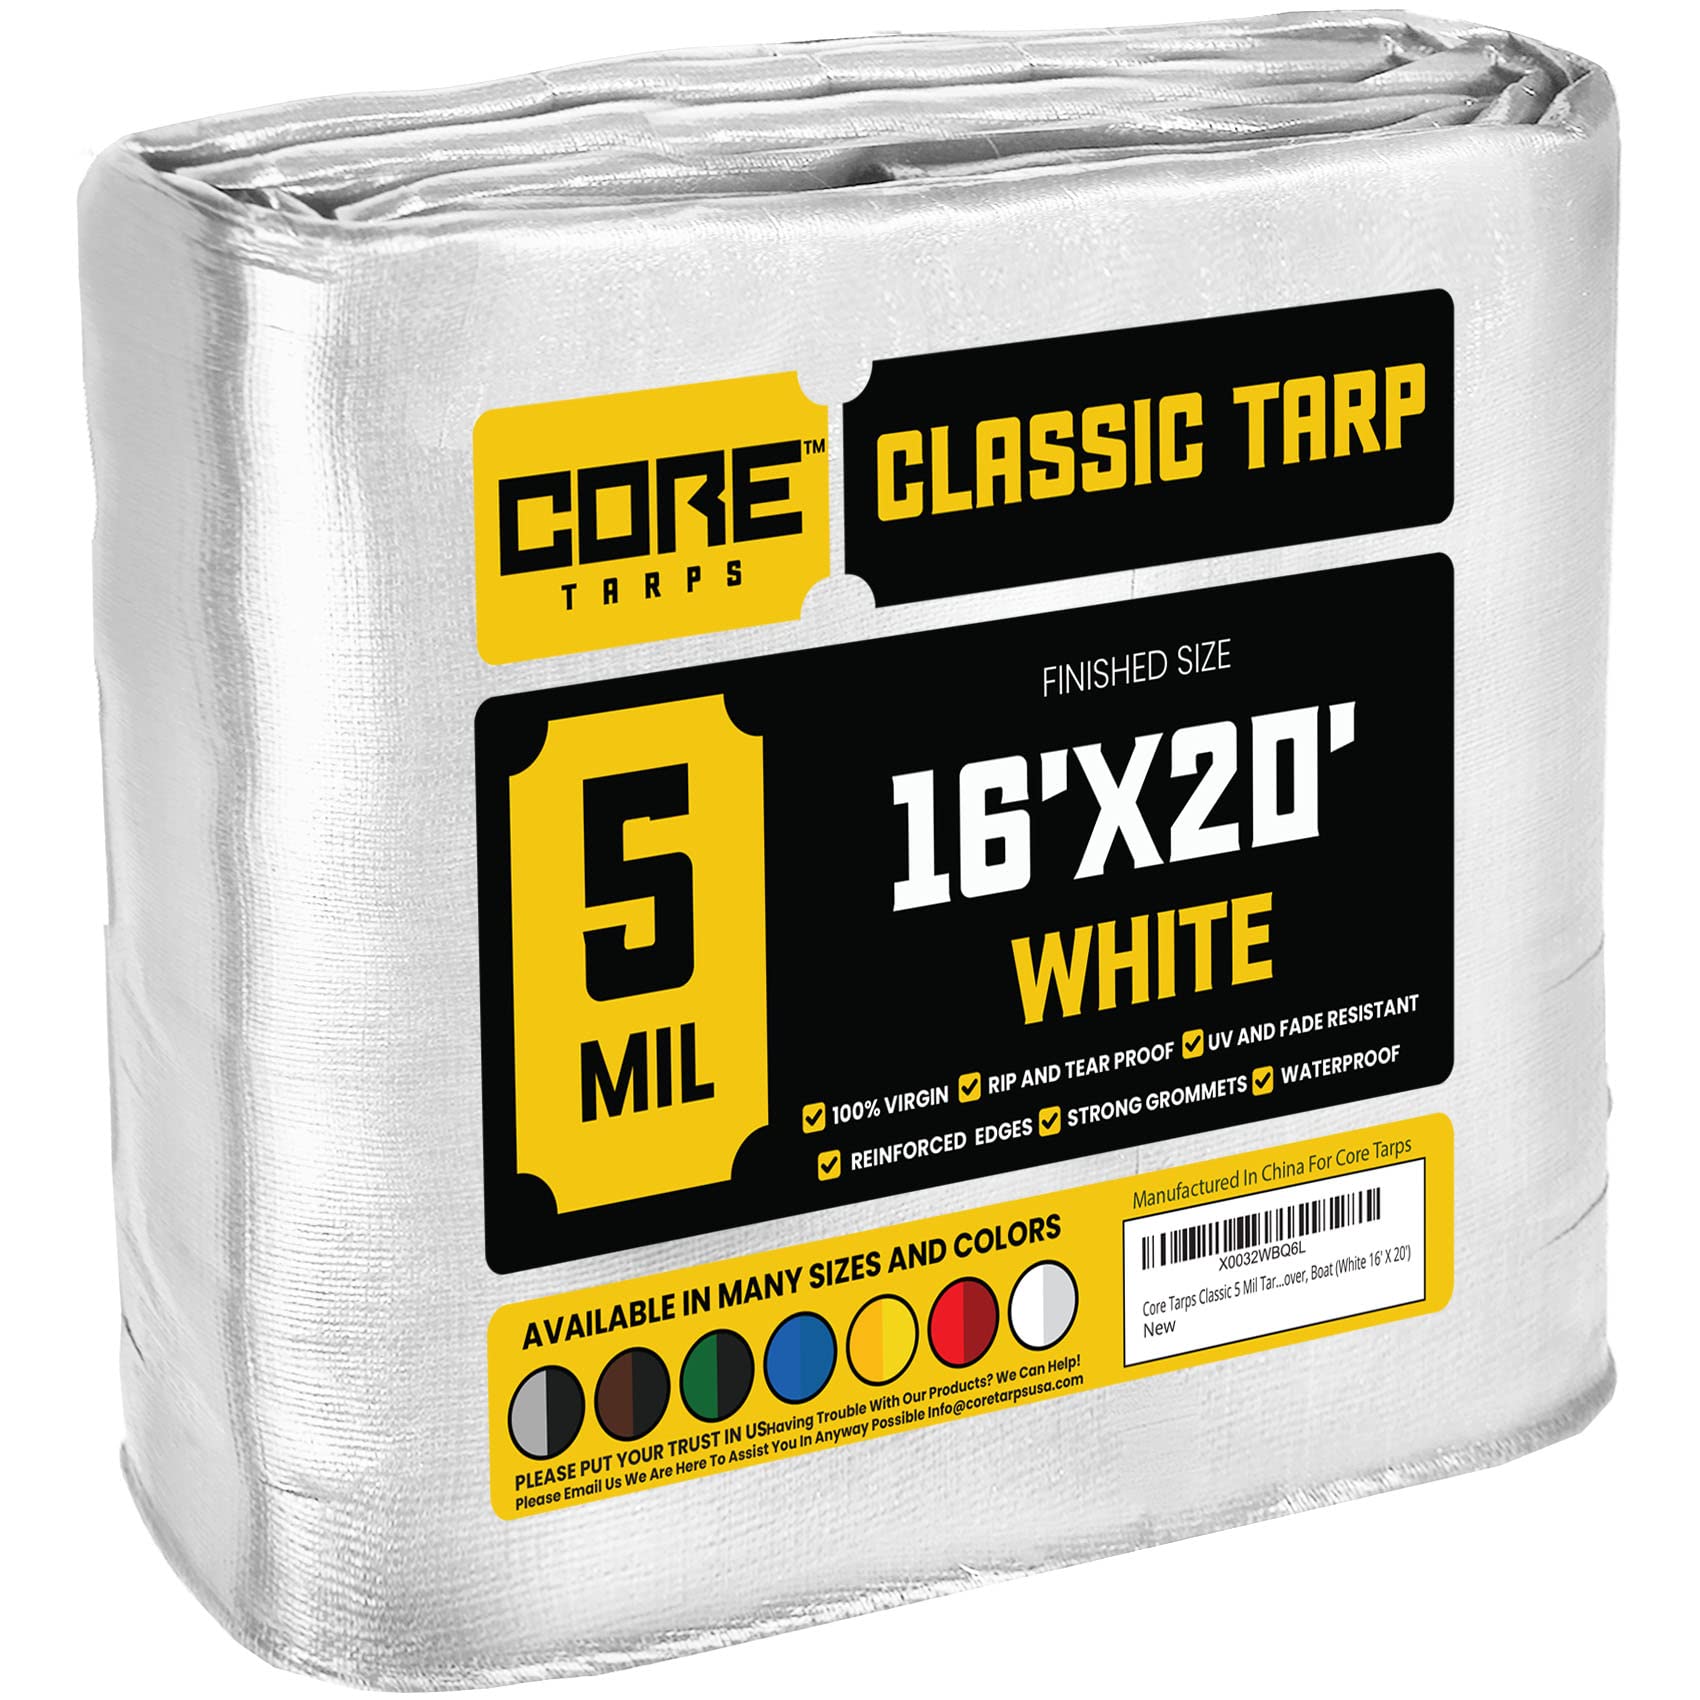 core Tarps classic 5 Mil Tarp cover, Waterproof, UV Resistant, Rip and Tear Proof, Poly Tarpaulin with Reinforced Edges for Roof